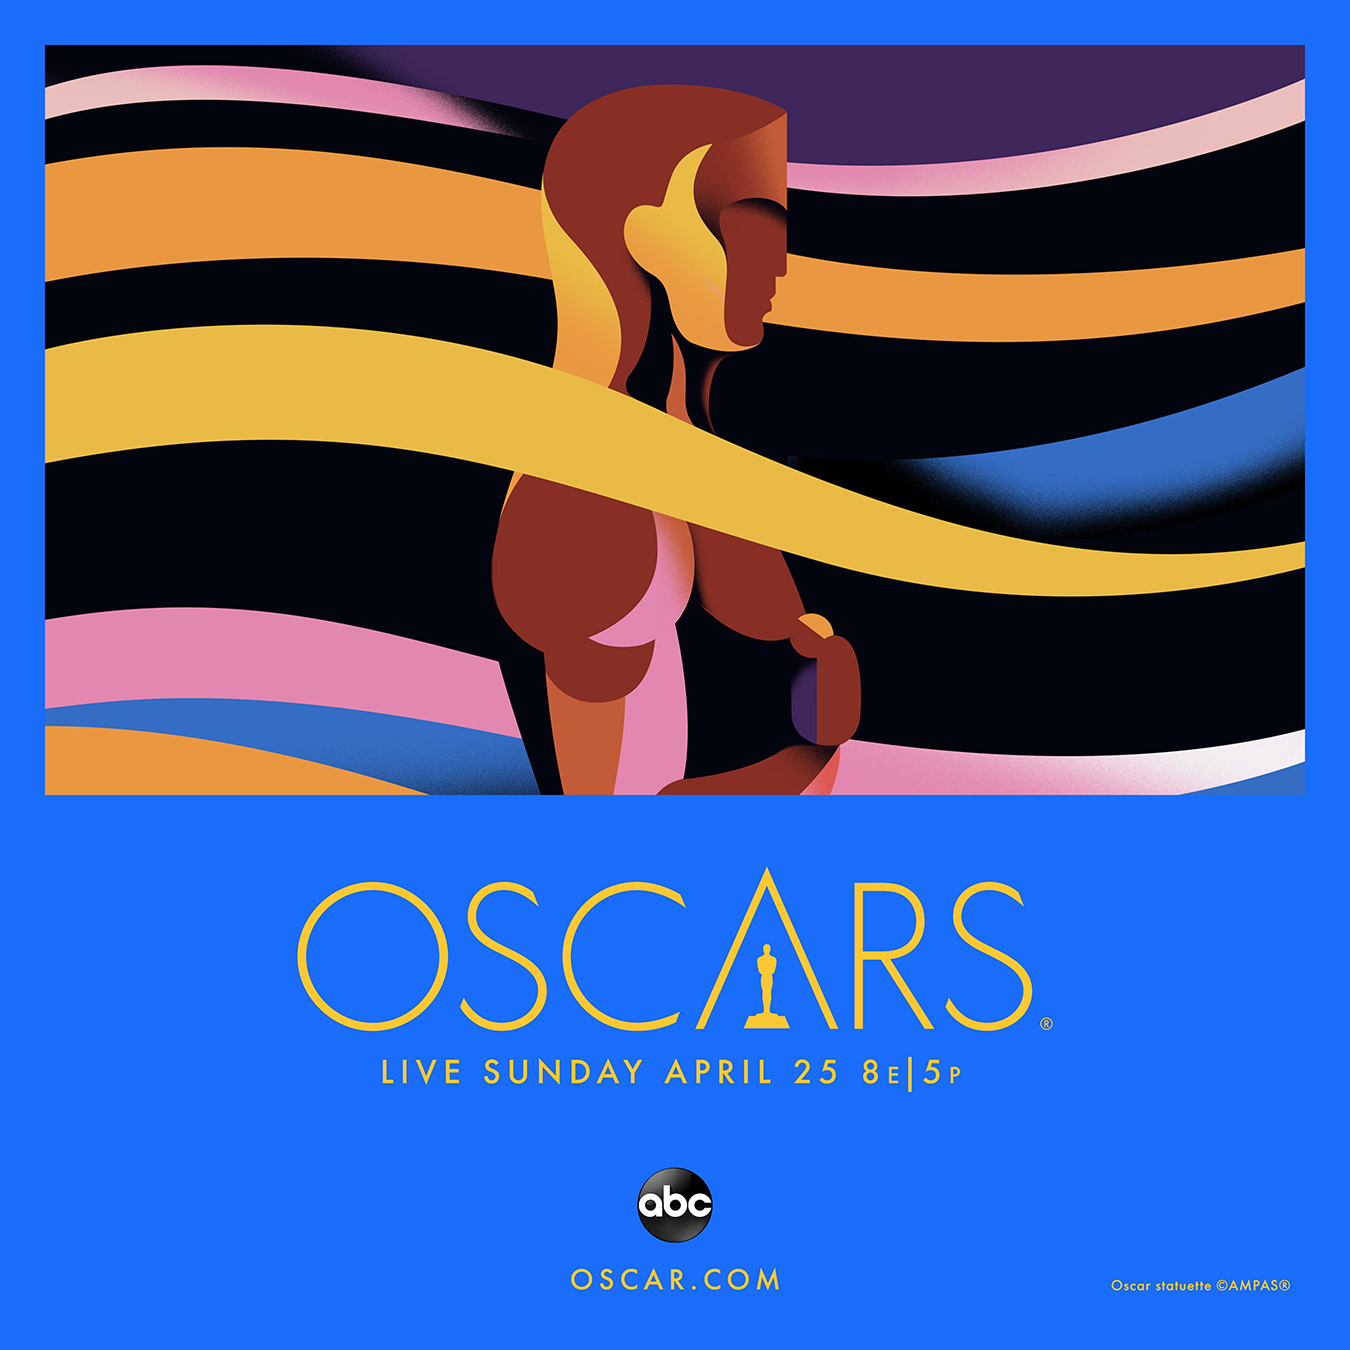 93rd Oscars’ campaign art by Petra Eriksson